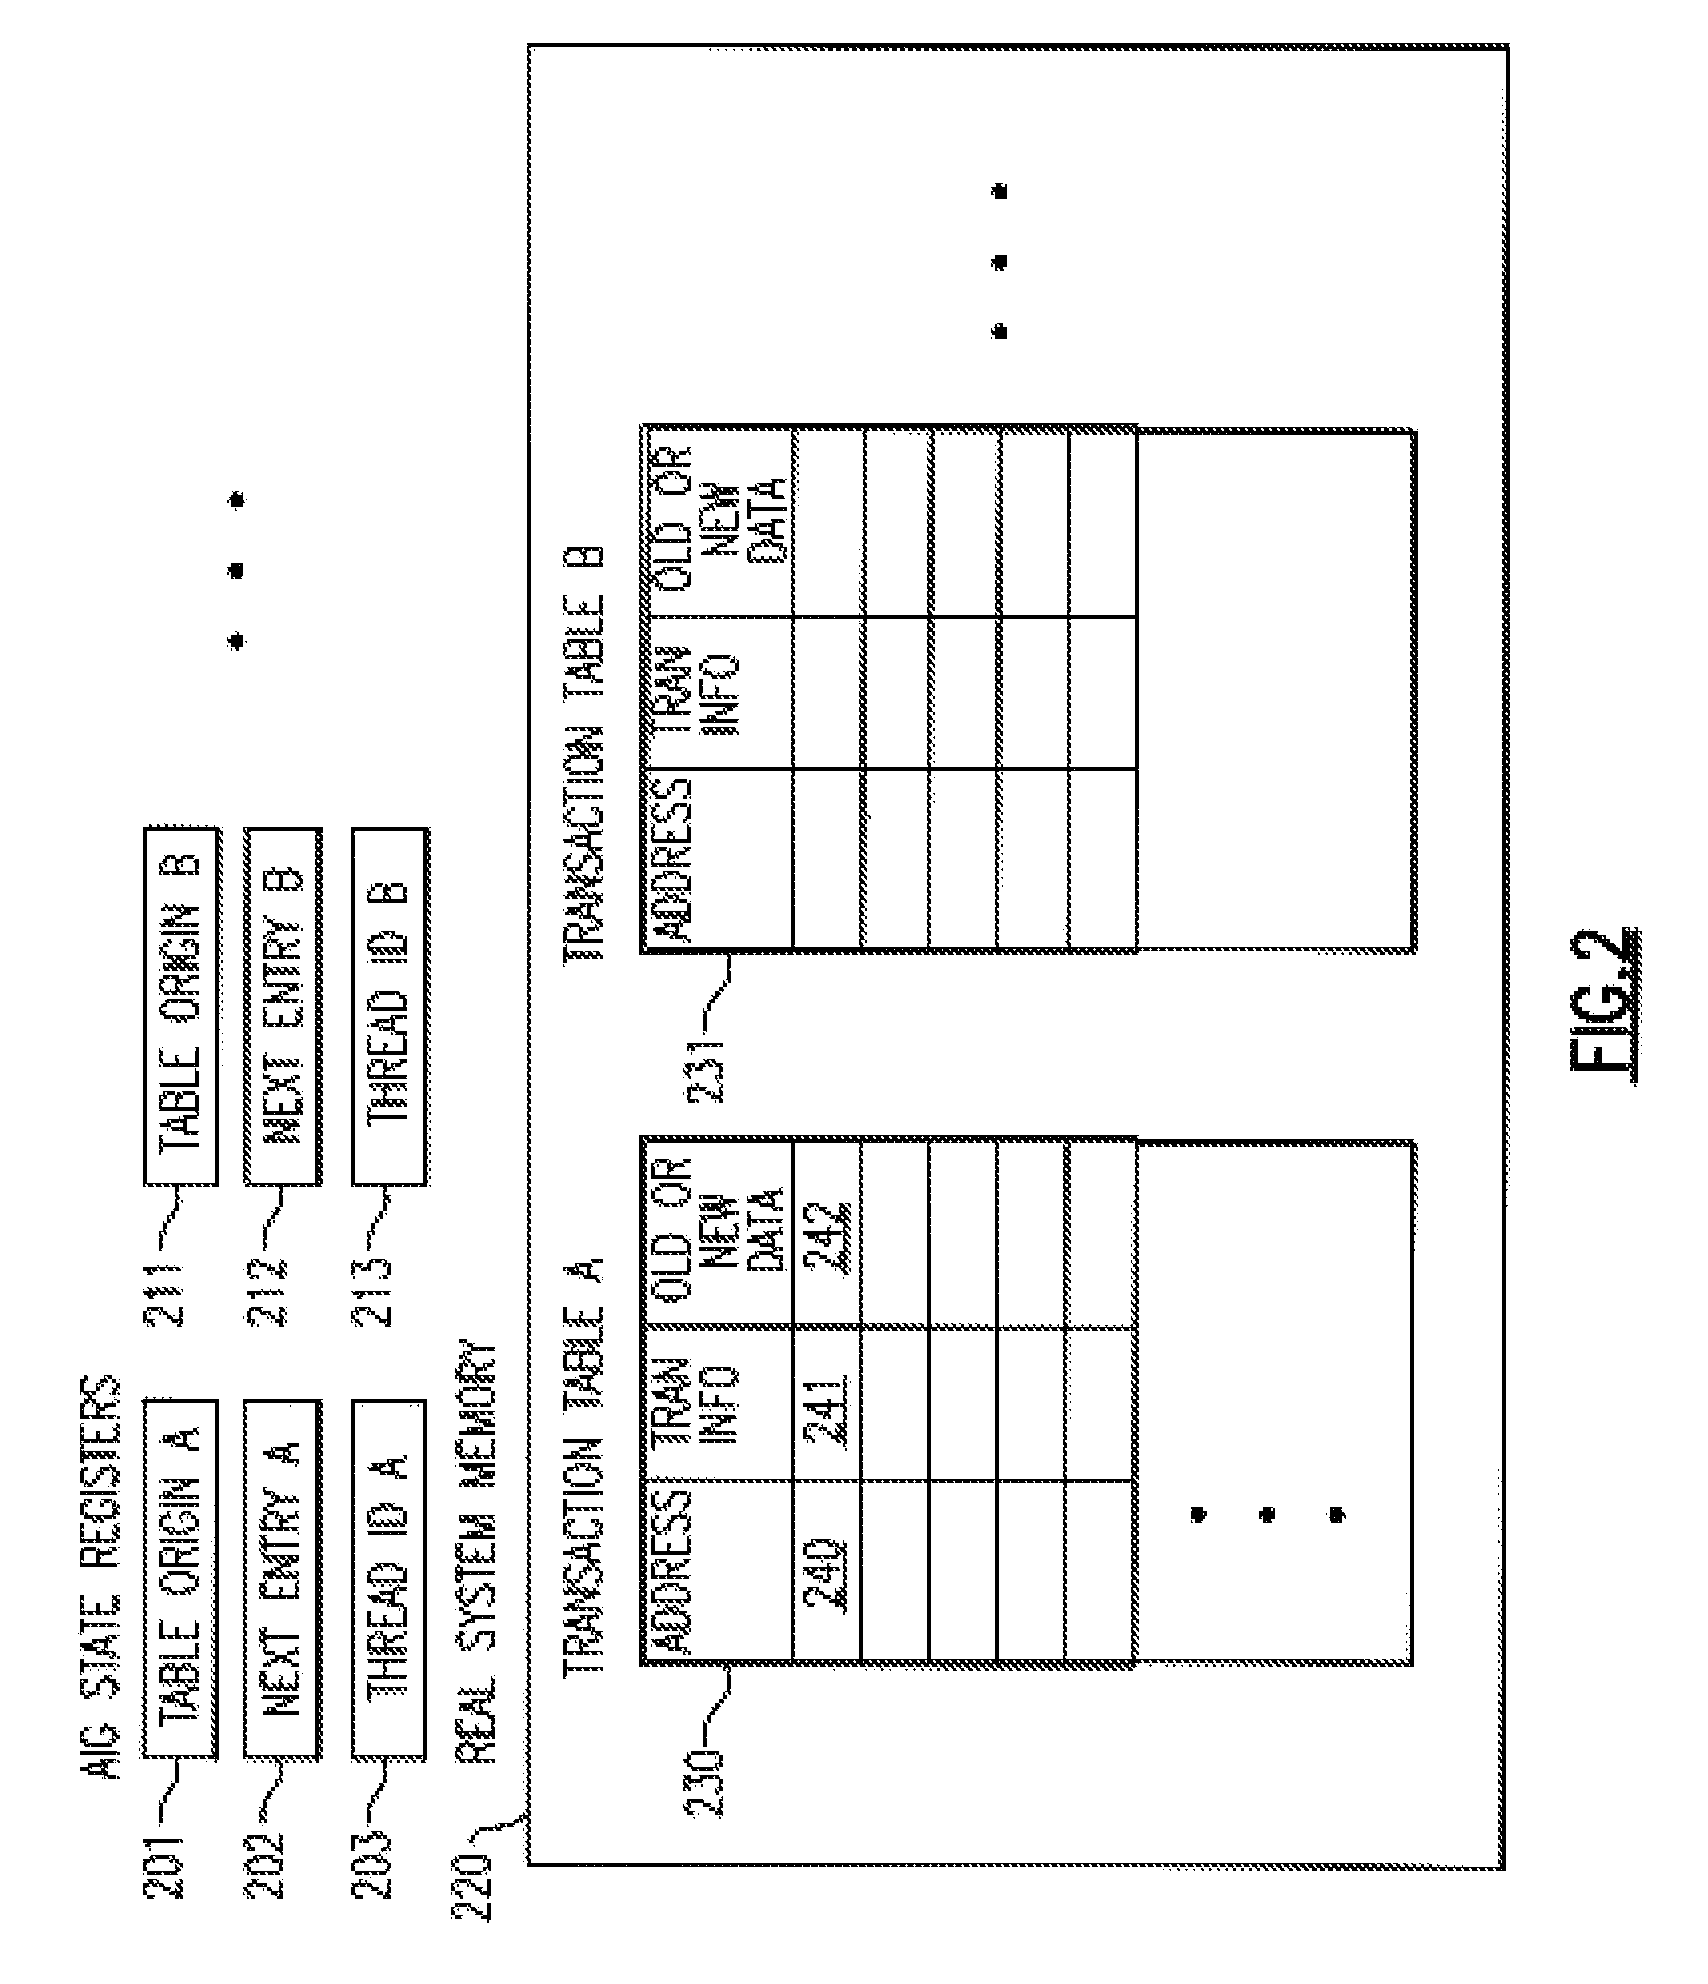 Computing System with Optimized Support for Transactional Memory